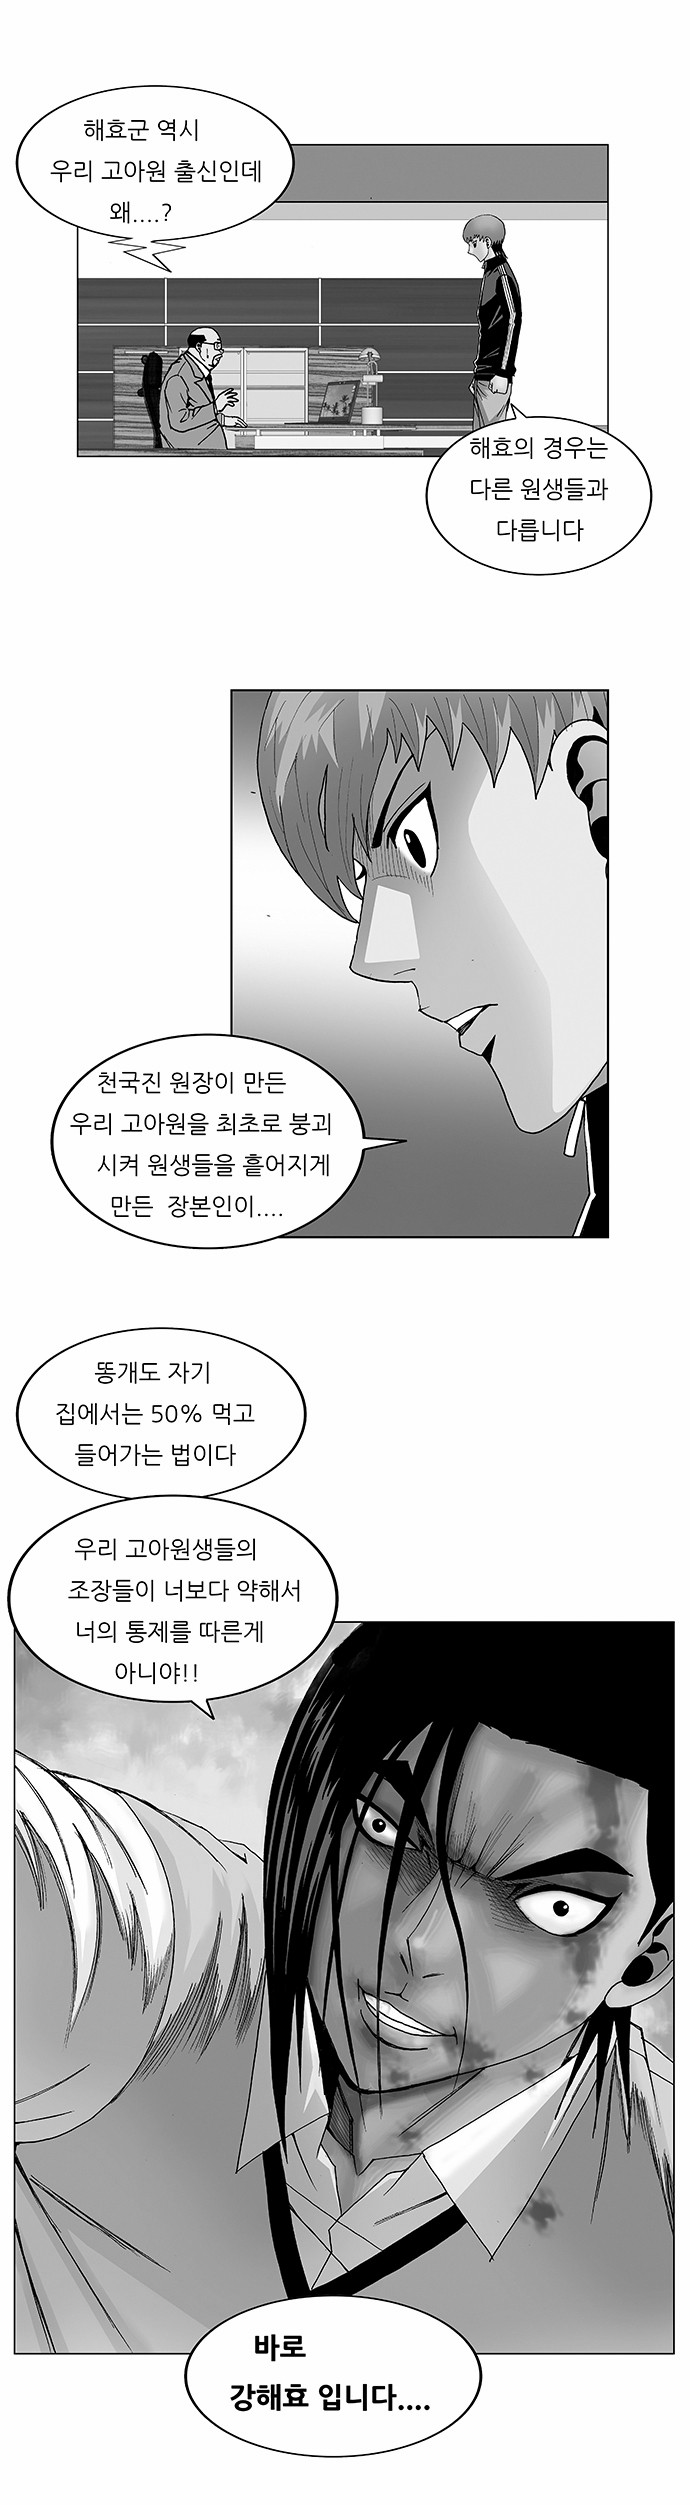 Ultimate Legend - Kang Hae Hyo - Chapter 89 - Page 1